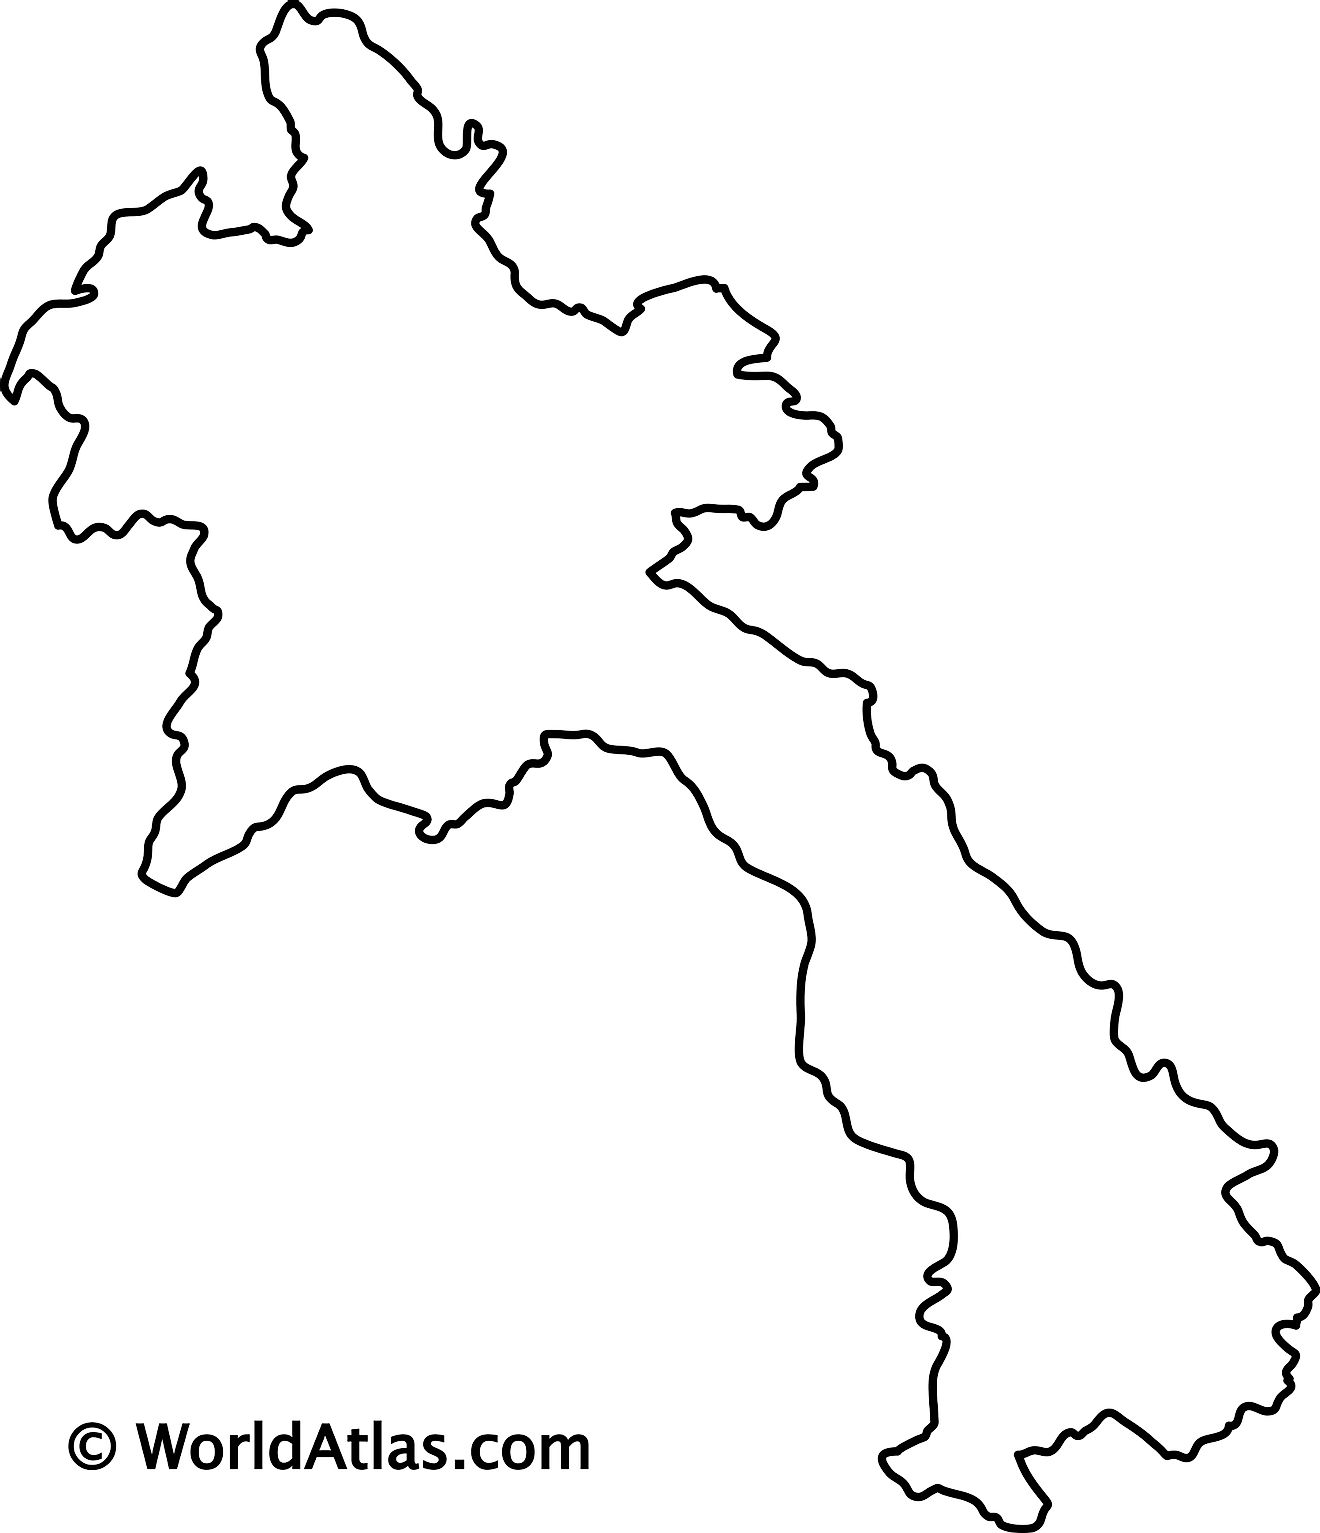 Blank Outline Map of Laos